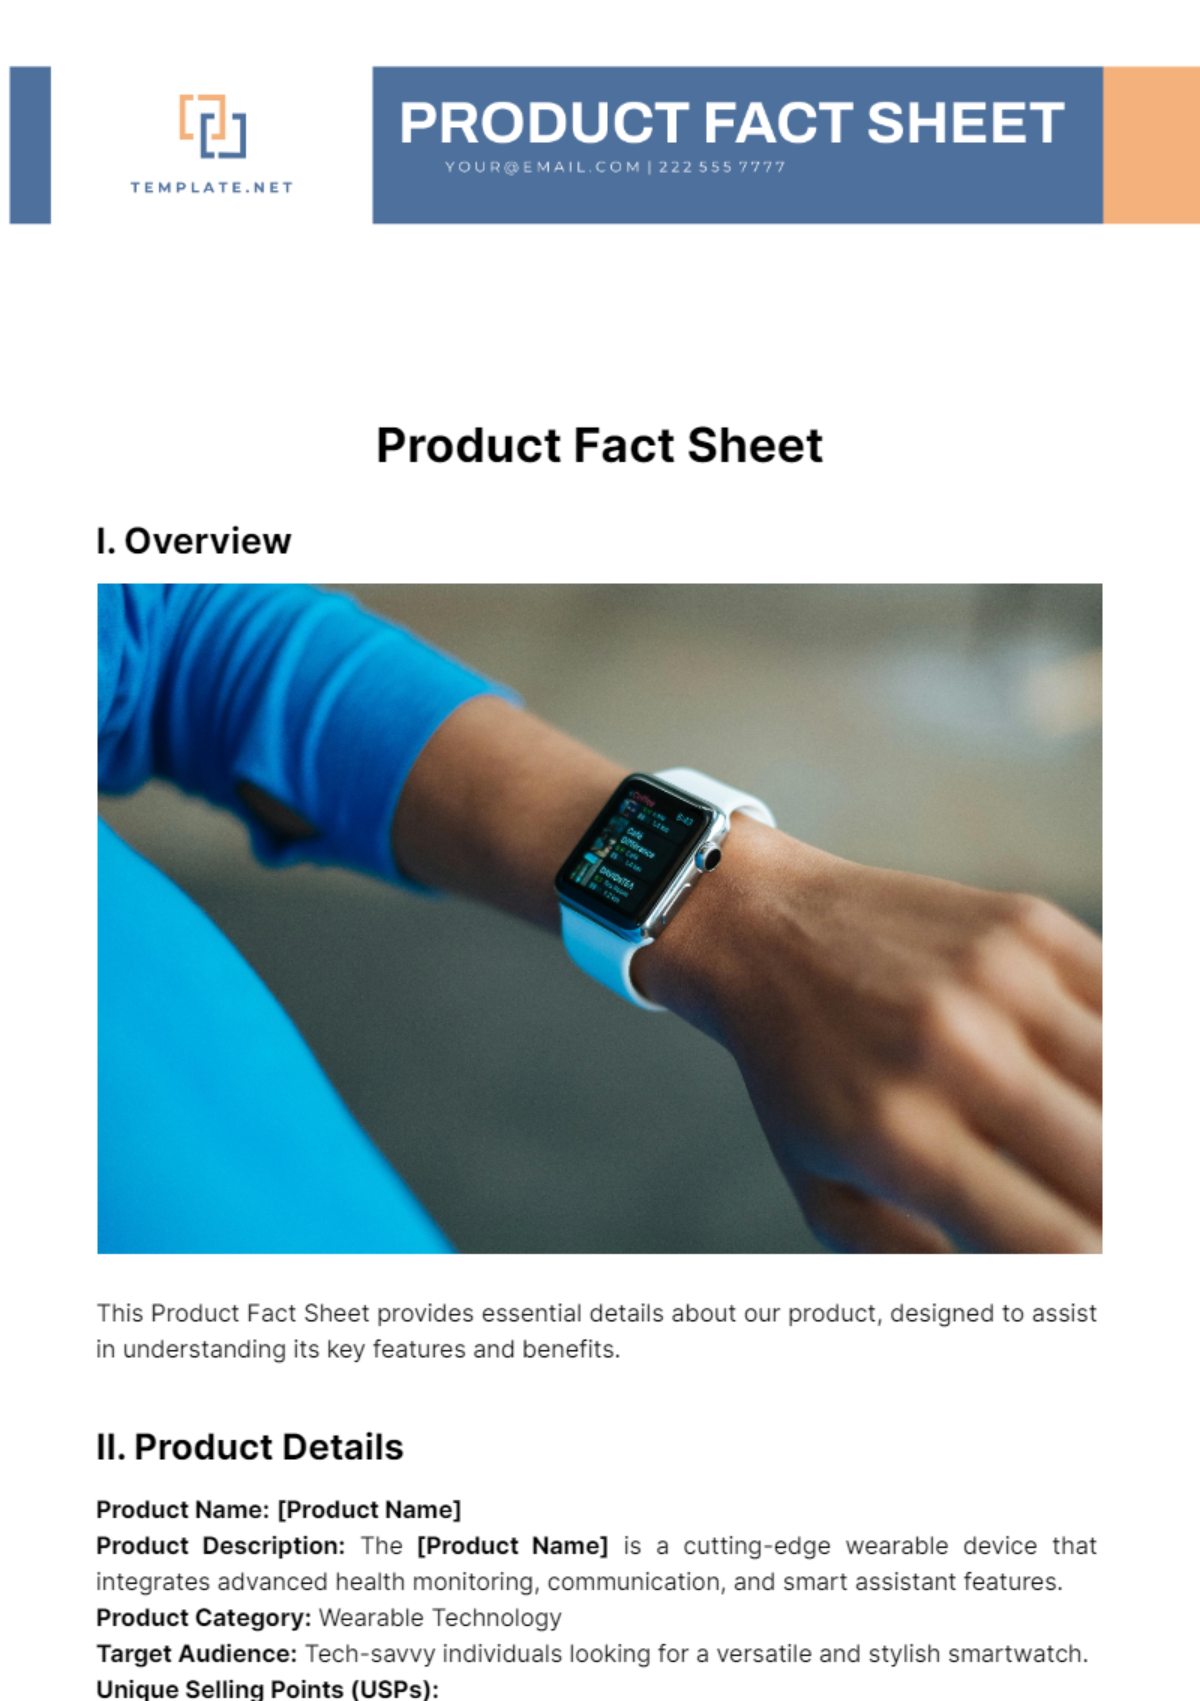 Free Product Fact Sheet Template